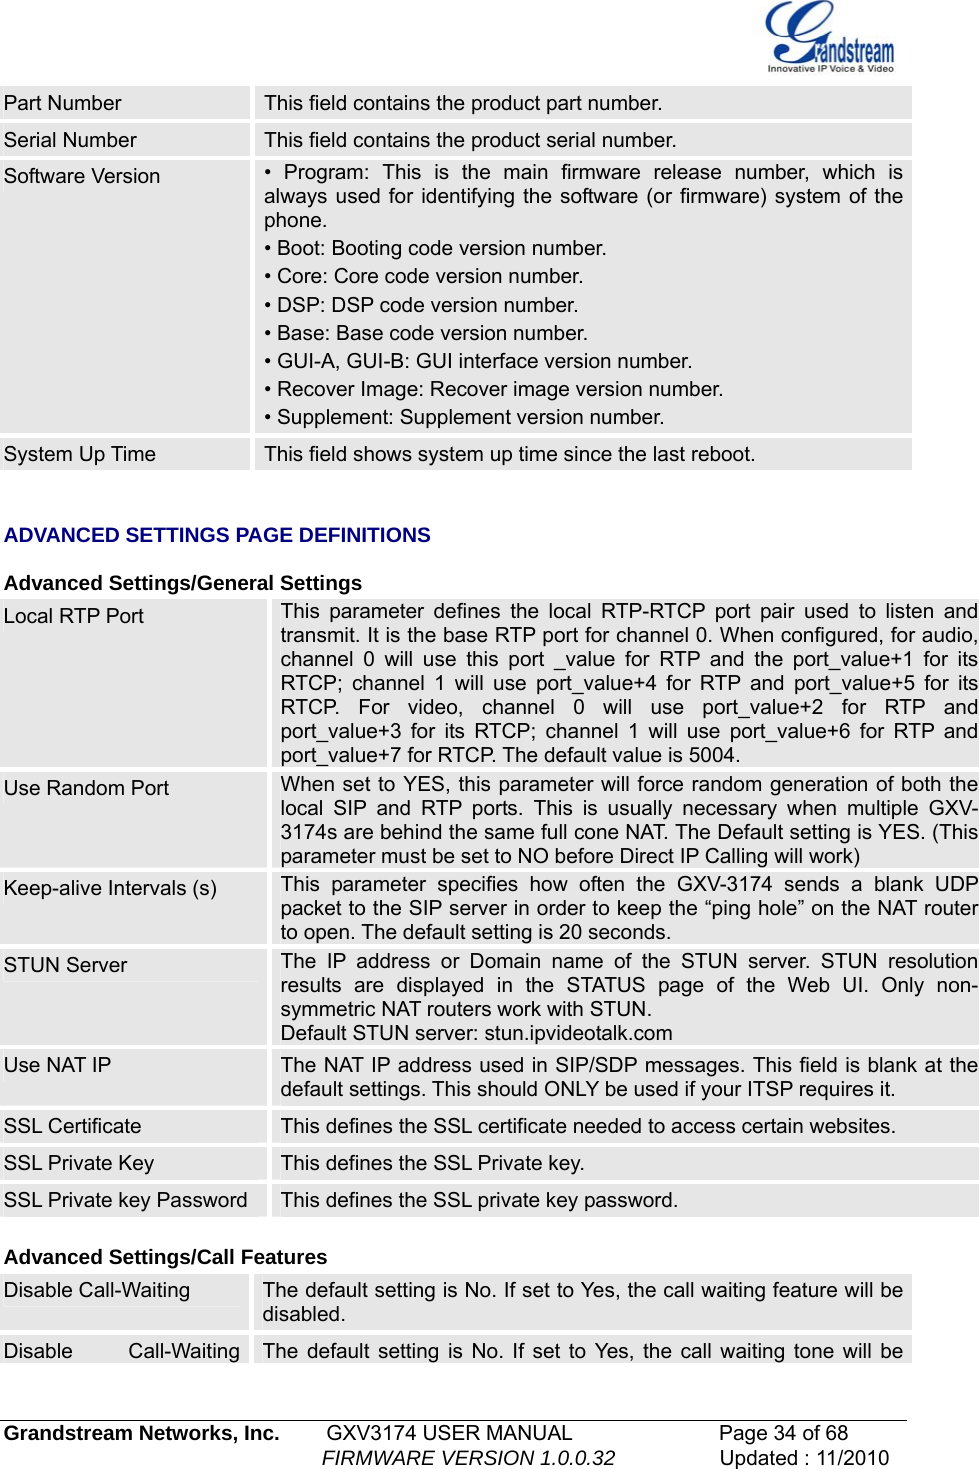   Grandstream Networks, Inc.        GXV3174 USER MANUAL                      Page 34 of 68                                                        FIRMWARE VERSION 1.0.0.32                  Updated : 11/2010  Part Number  This field contains the product part number. Serial Number  This field contains the product serial number. Software Version  • Program: This is the main firmware release number, which is always used for identifying the software (or firmware) system of the phone. • Boot: Booting code version number. • Core: Core code version number. • DSP: DSP code version number. • Base: Base code version number. • GUI-A, GUI-B: GUI interface version number. • Recover Image: Recover image version number. • Supplement: Supplement version number. System Up Time  This field shows system up time since the last reboot.   ADVANCED SETTINGS PAGE DEFINITIONS  Advanced Settings/General Settings Local RTP Port  This parameter defines the local RTP-RTCP port pair used to listen and transmit. It is the base RTP port for channel 0. When configured, for audio, channel 0 will use this port _value for RTP and the port_value+1 for its RTCP; channel 1 will use port_value+4 for RTP and port_value+5 for its RTCP. For video, channel 0 will use port_value+2 for RTP and port_value+3 for its RTCP; channel 1 will use port_value+6 for RTP and port_value+7 for RTCP. The default value is 5004. Use Random Port  When set to YES, this parameter will force random generation of both the local SIP and RTP ports. This is usually necessary when multiple GXV-3174s are behind the same full cone NAT. The Default setting is YES. (This parameter must be set to NO before Direct IP Calling will work) Keep-alive Intervals (s)  This parameter specifies how often the GXV-3174 sends a blank UDP packet to the SIP server in order to keep the “ping hole” on the NAT router to open. The default setting is 20 seconds. STUN Server  The IP address or Domain name of the STUN server. STUN resolution results are displayed in the STATUS page of the Web UI. Only non-symmetric NAT routers work with STUN. Default STUN server: stun.ipvideotalk.com Use NAT IP  The NAT IP address used in SIP/SDP messages. This field is blank at the default settings. This should ONLY be used if your ITSP requires it. SSL Certificate  This defines the SSL certificate needed to access certain websites. SSL Private Key  This defines the SSL Private key. SSL Private key Password  This defines the SSL private key password.   Advanced Settings/Call Features Disable Call-Waiting  The default setting is No. If set to Yes, the call waiting feature will be disabled. Disable Call-Waiting The default setting is No. If set to Yes, the call waiting tone will be 